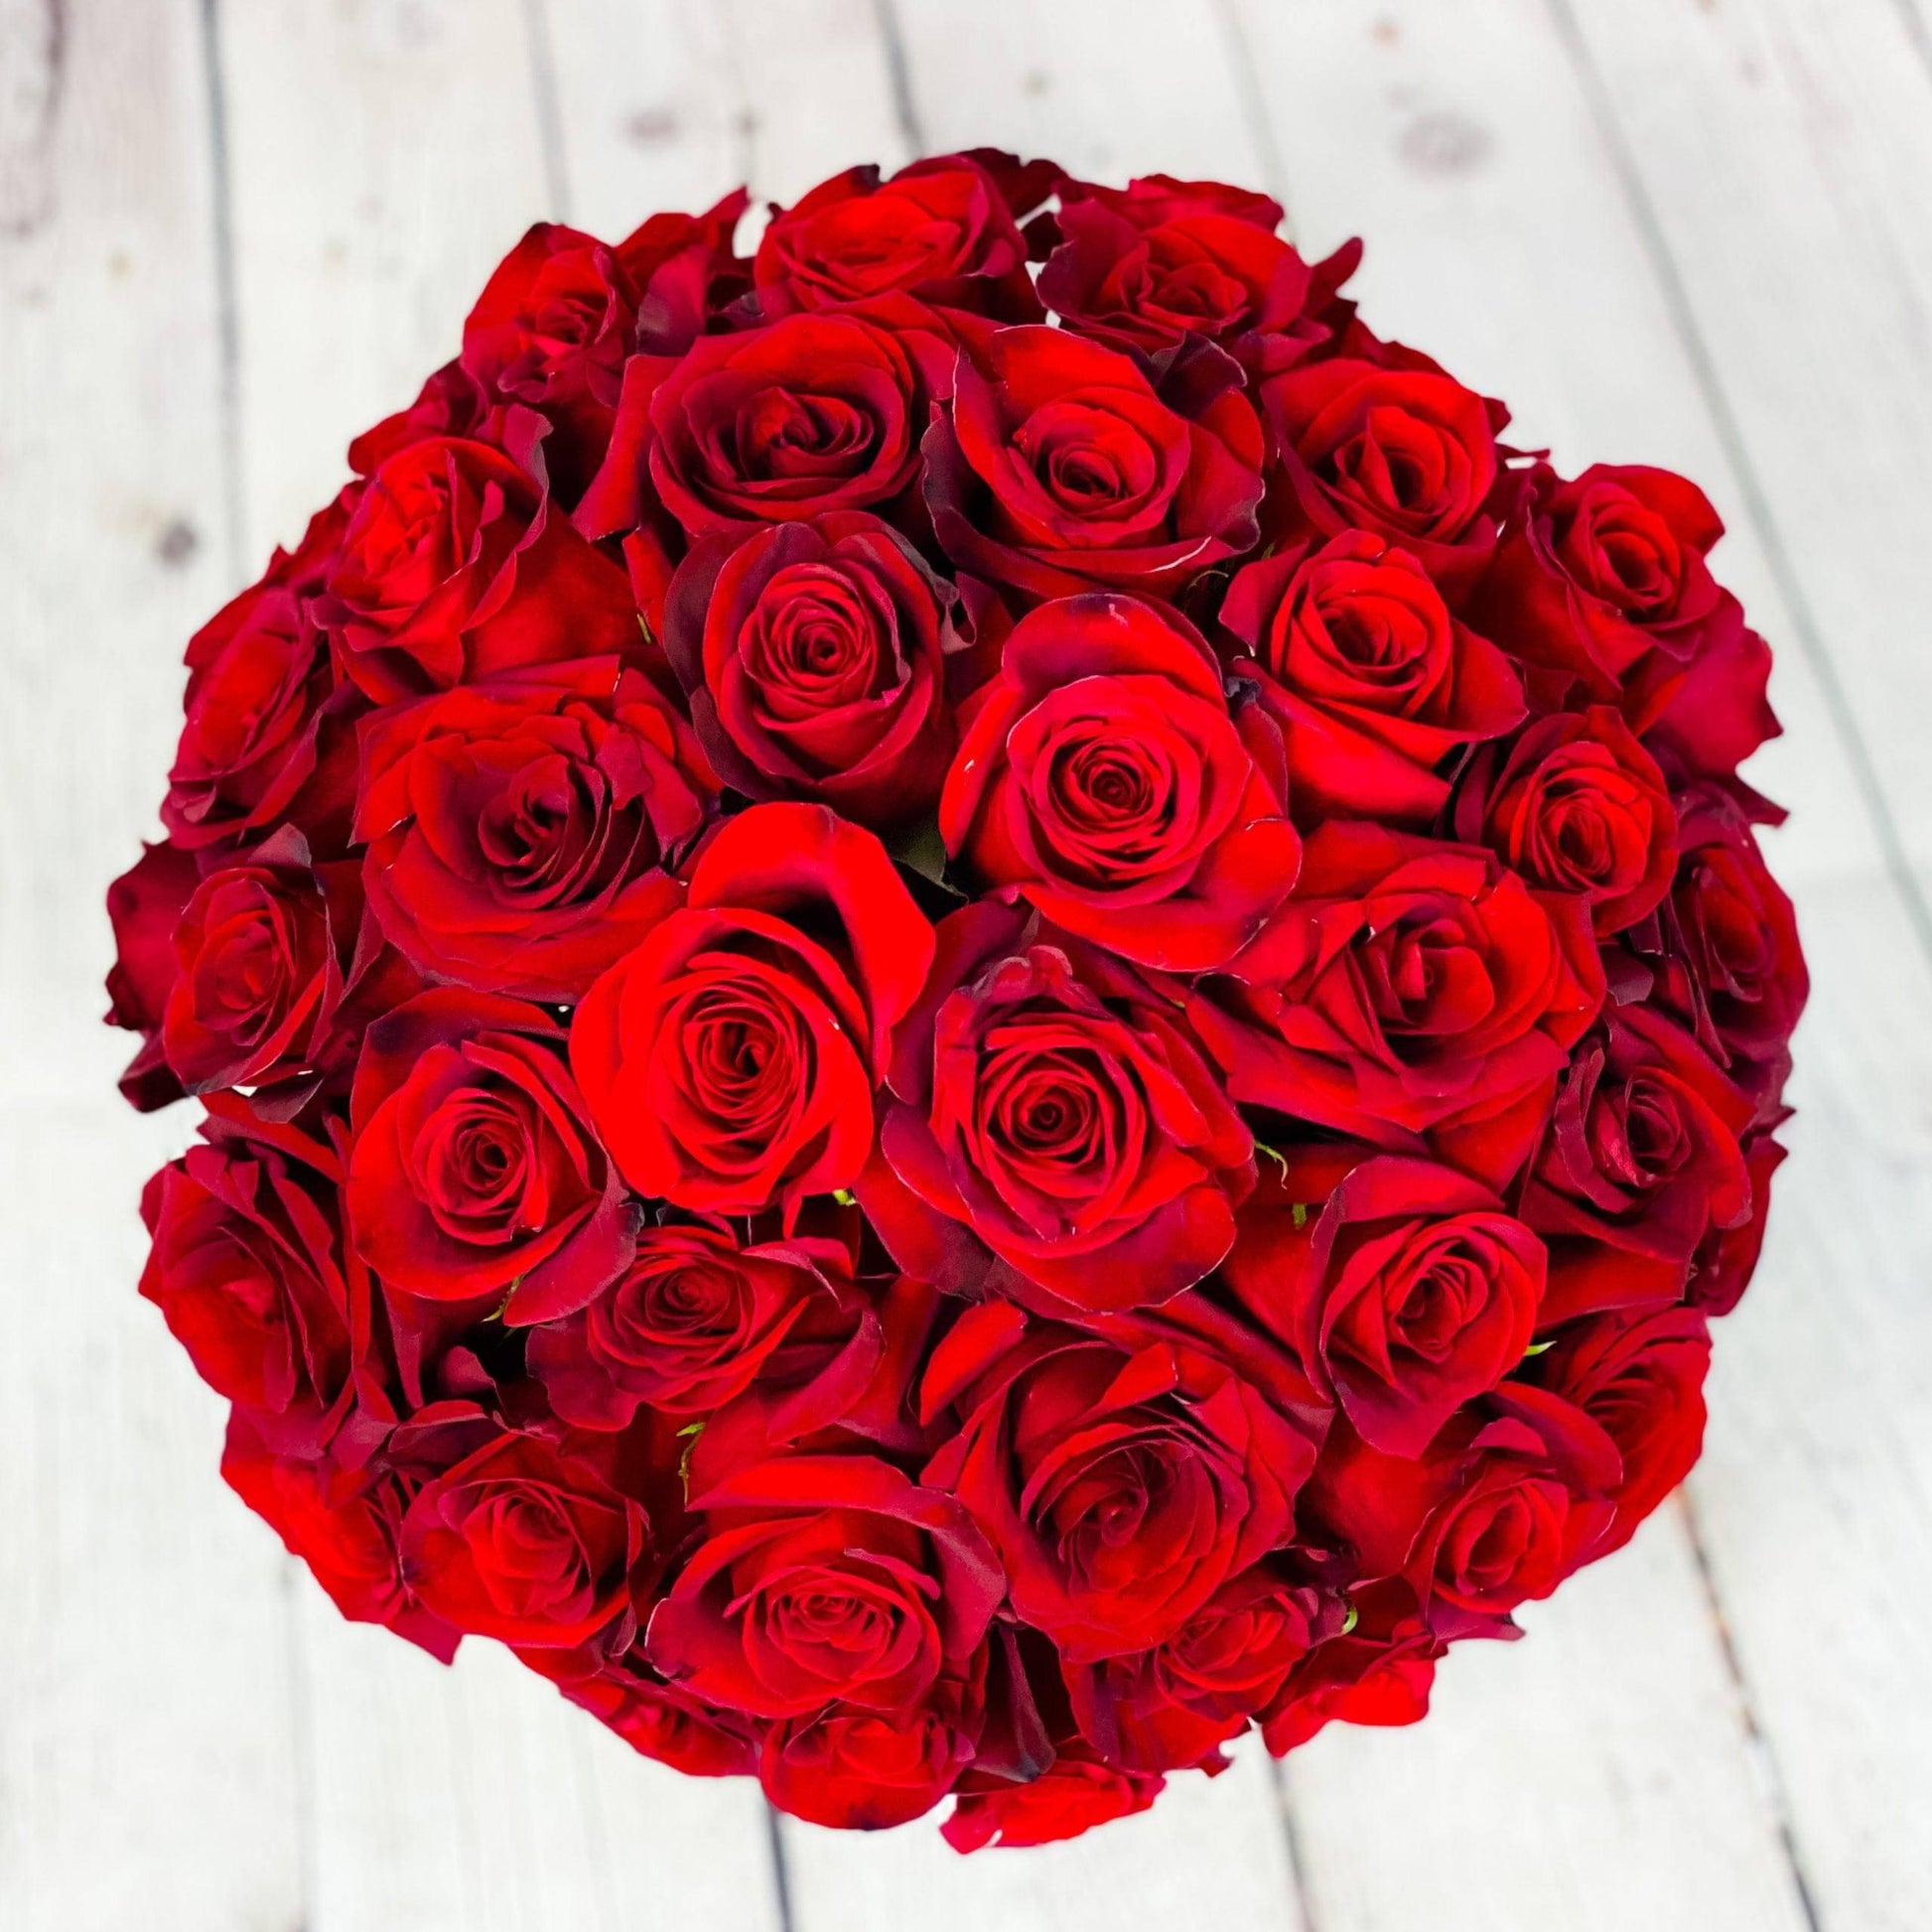 A Rose Flower Bouquet for Every Occasion